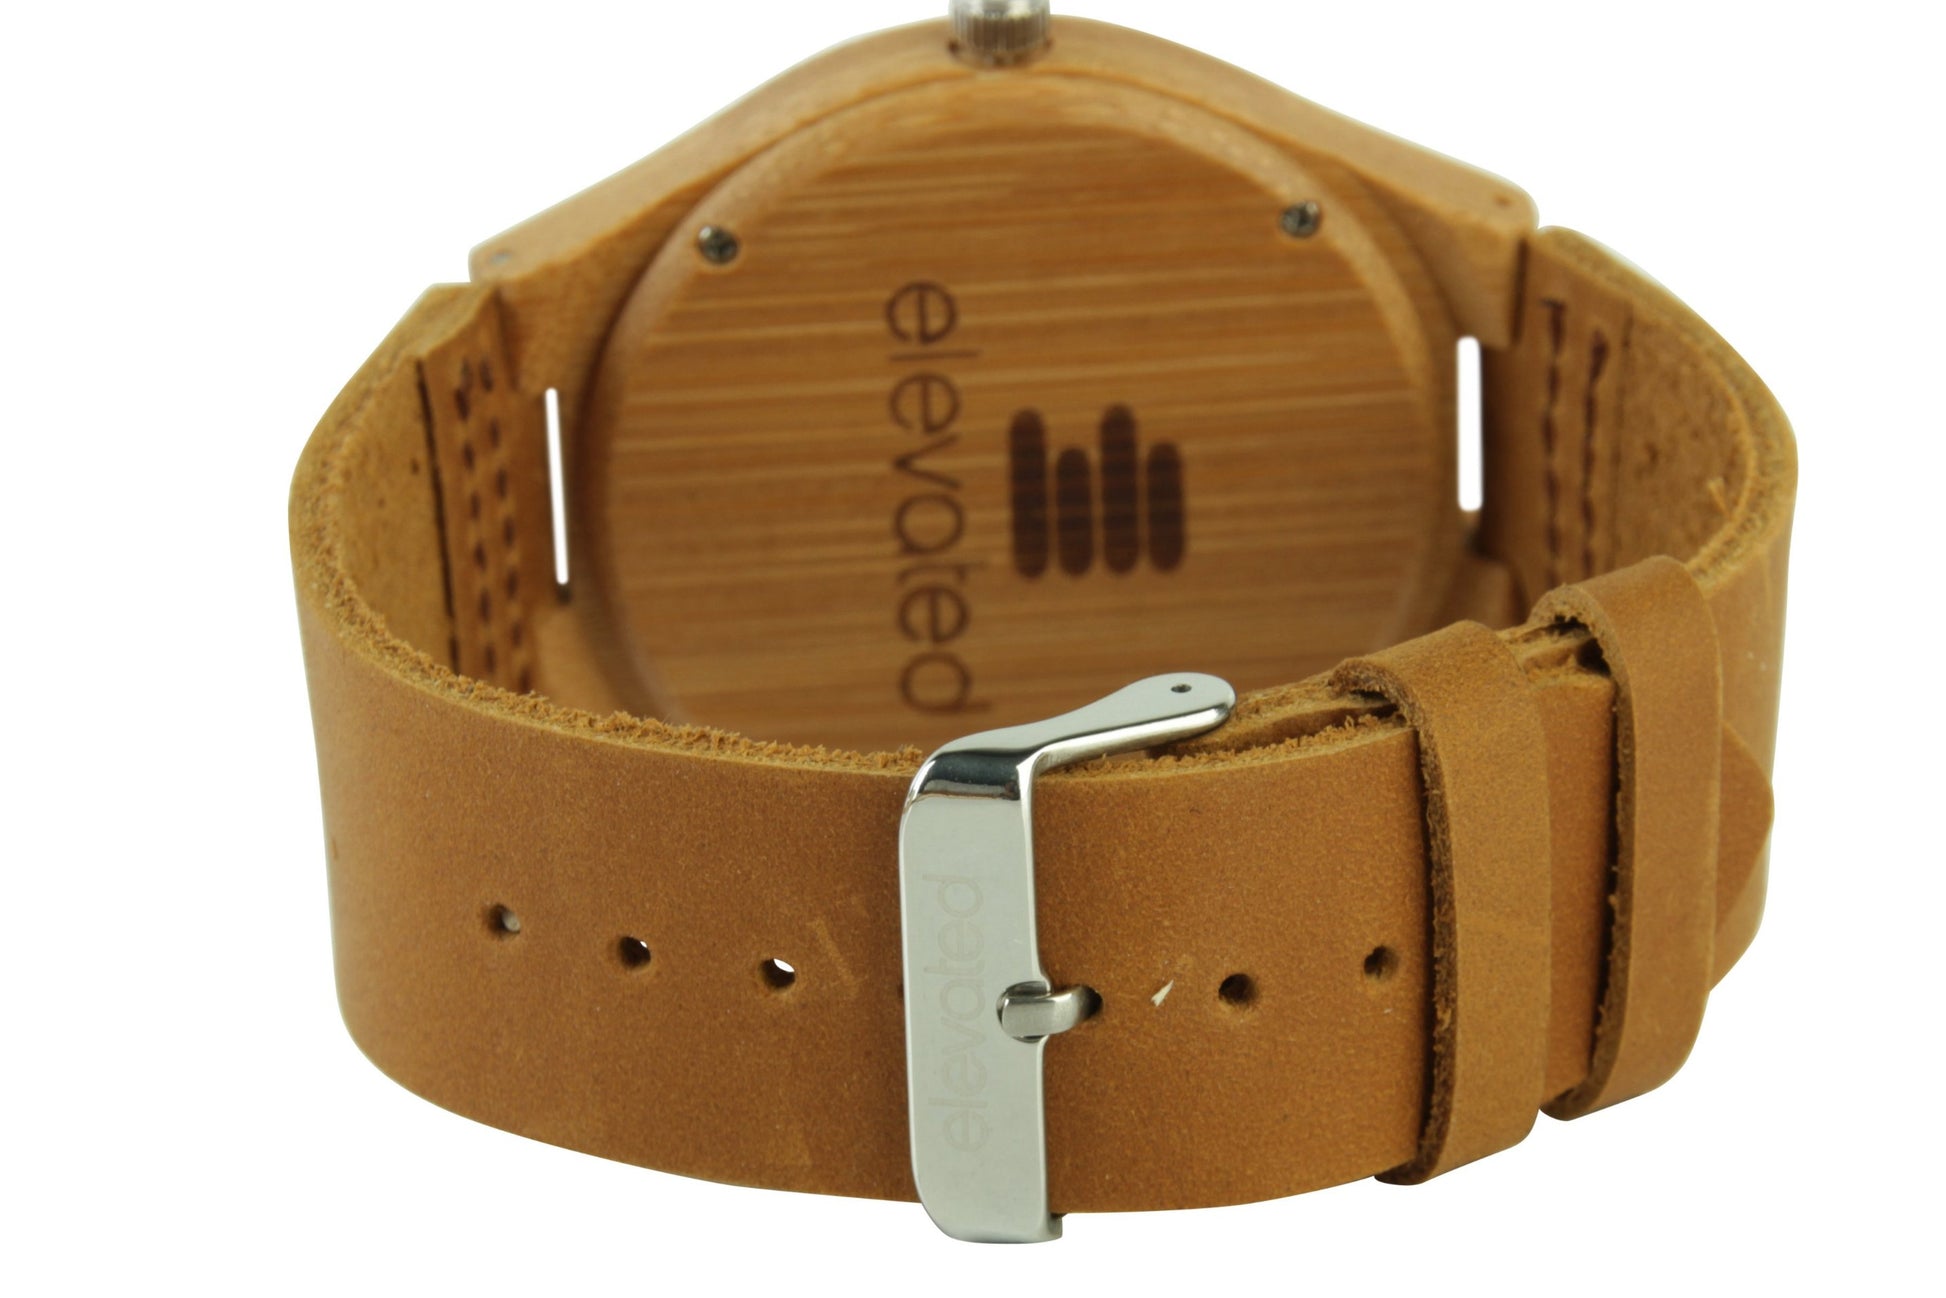 ABC BAMBOO WATCH LEATHER STRAP ELEVATED SHADES